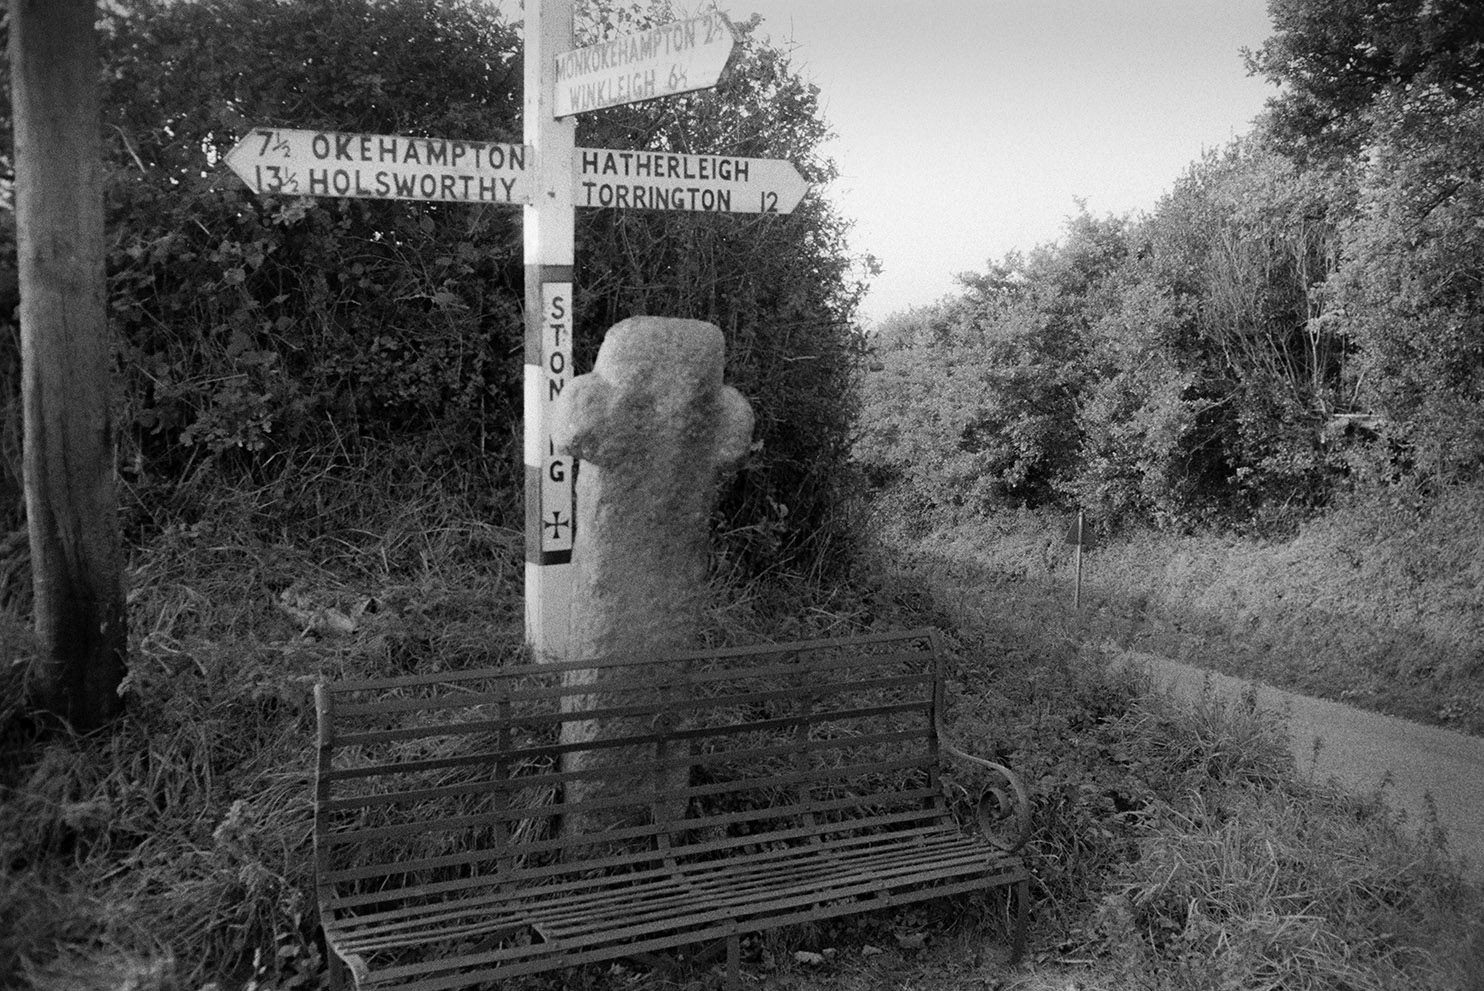 A signpost at Stoneleigh crossroads at Hatherleigh, behind a wayside cross and a metal bench.